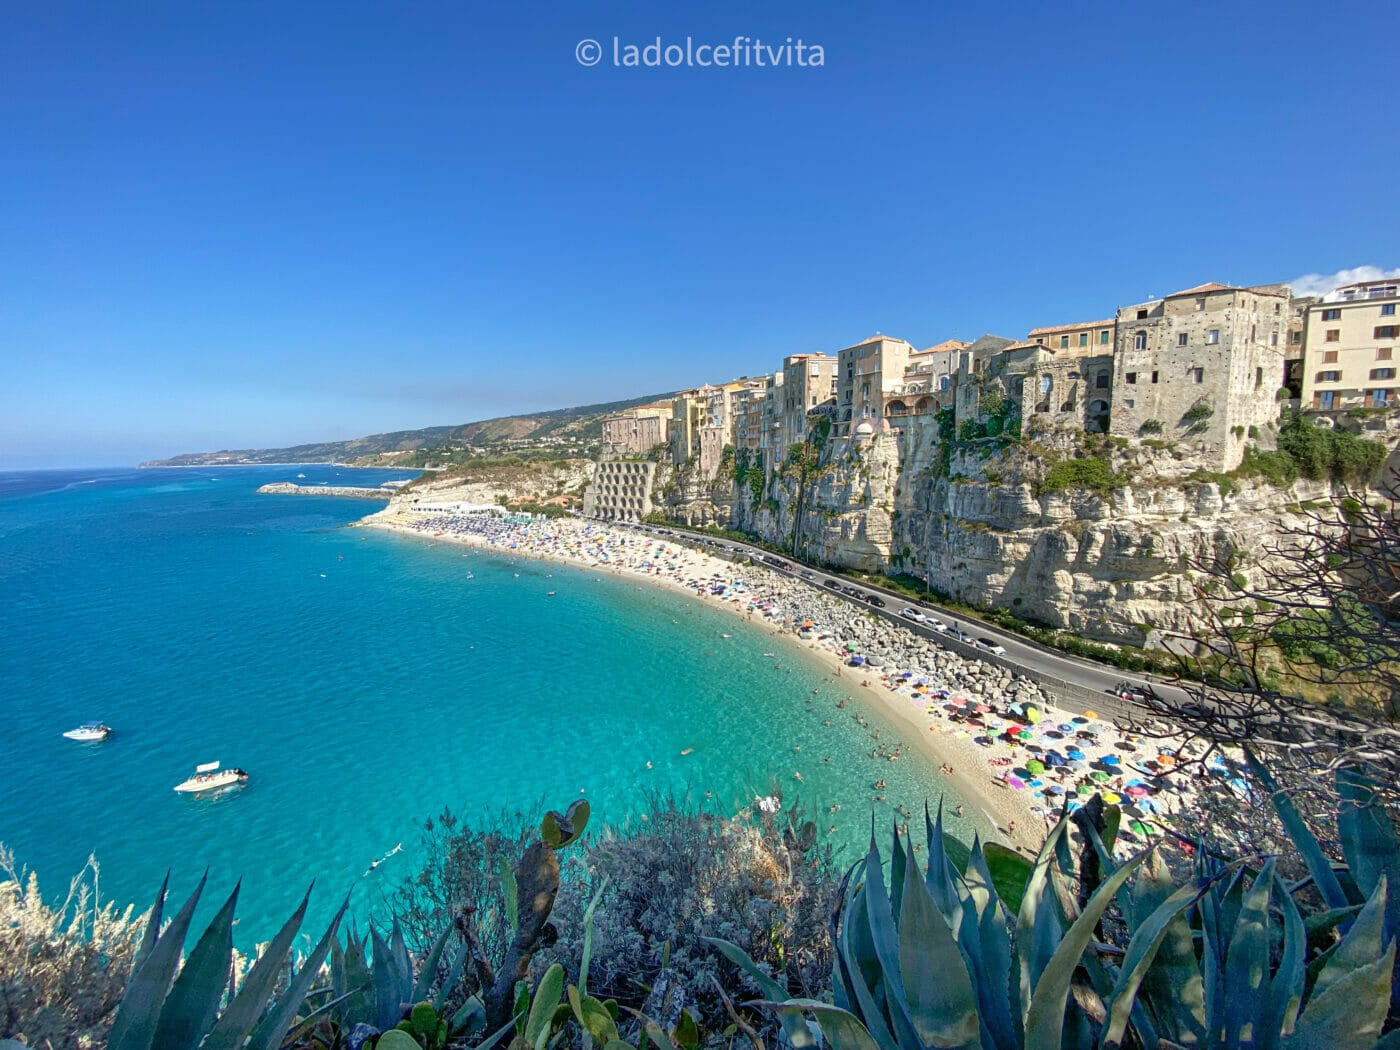 Bird's eye view of the turquoise shores of Tropea and its Rotonda beach